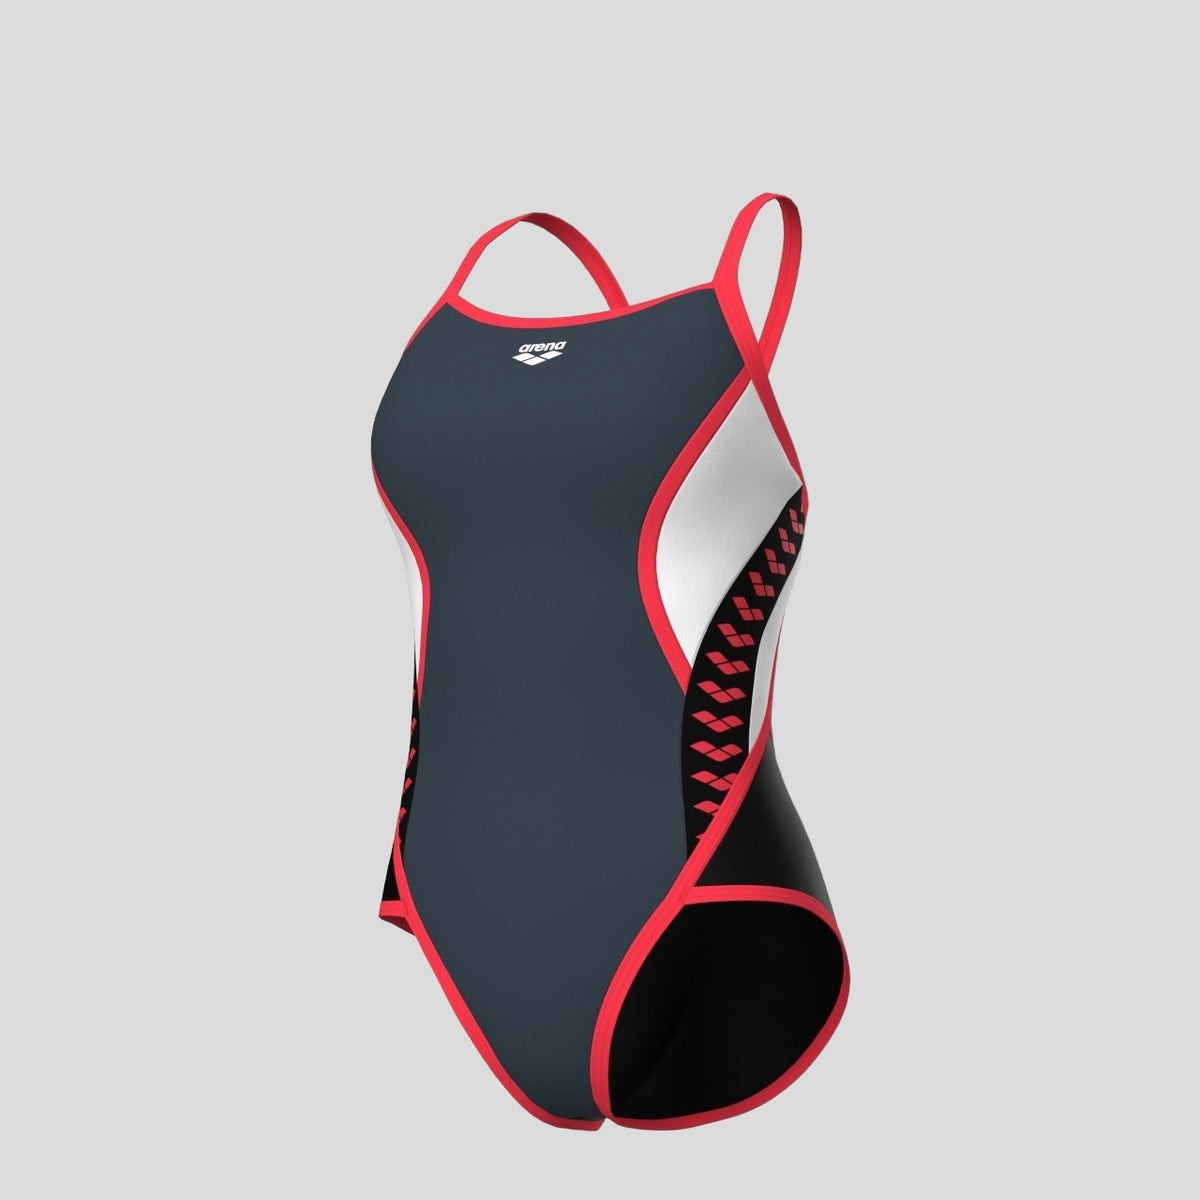 WOMENS ARENA ICONS SWIMSUIT SUPER FLY BACK